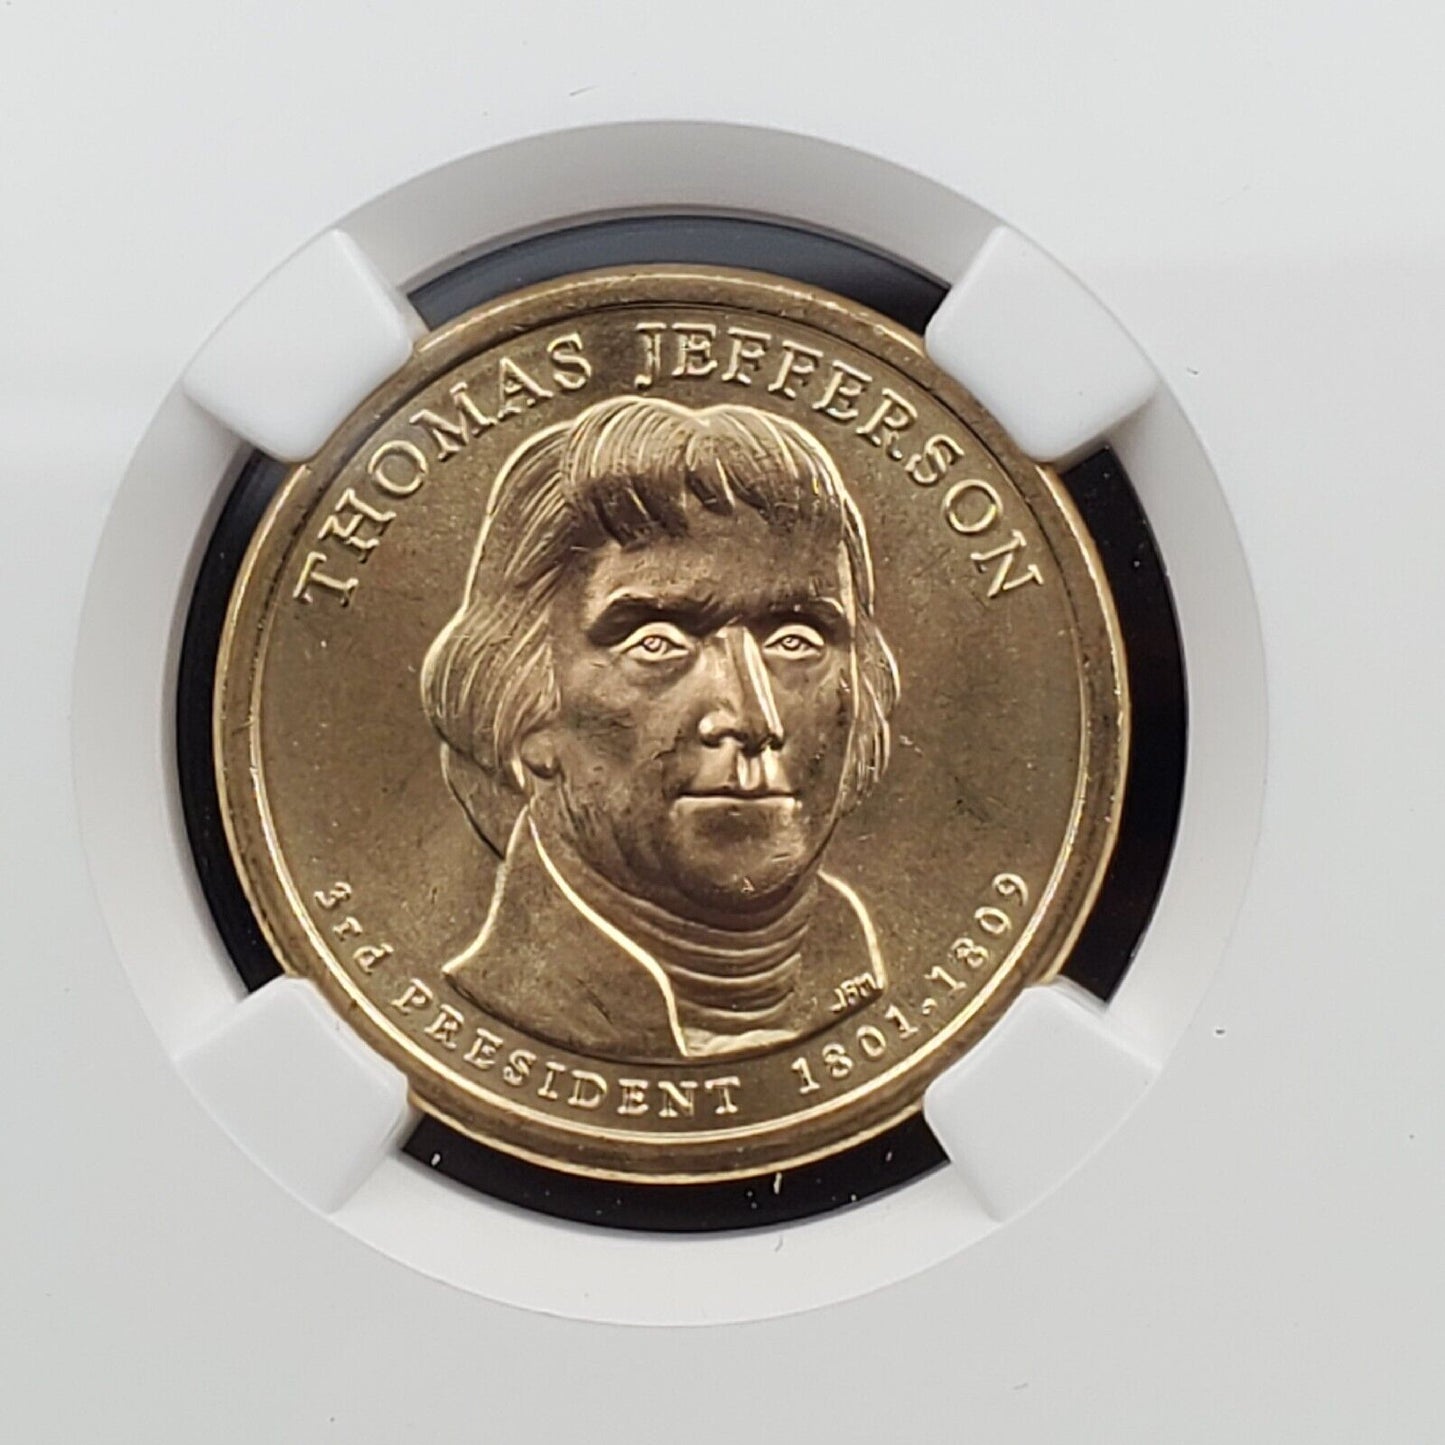 2007 P Thomas Jefferson Presidential Dollar Coin NGC MS66 First Day of Issue